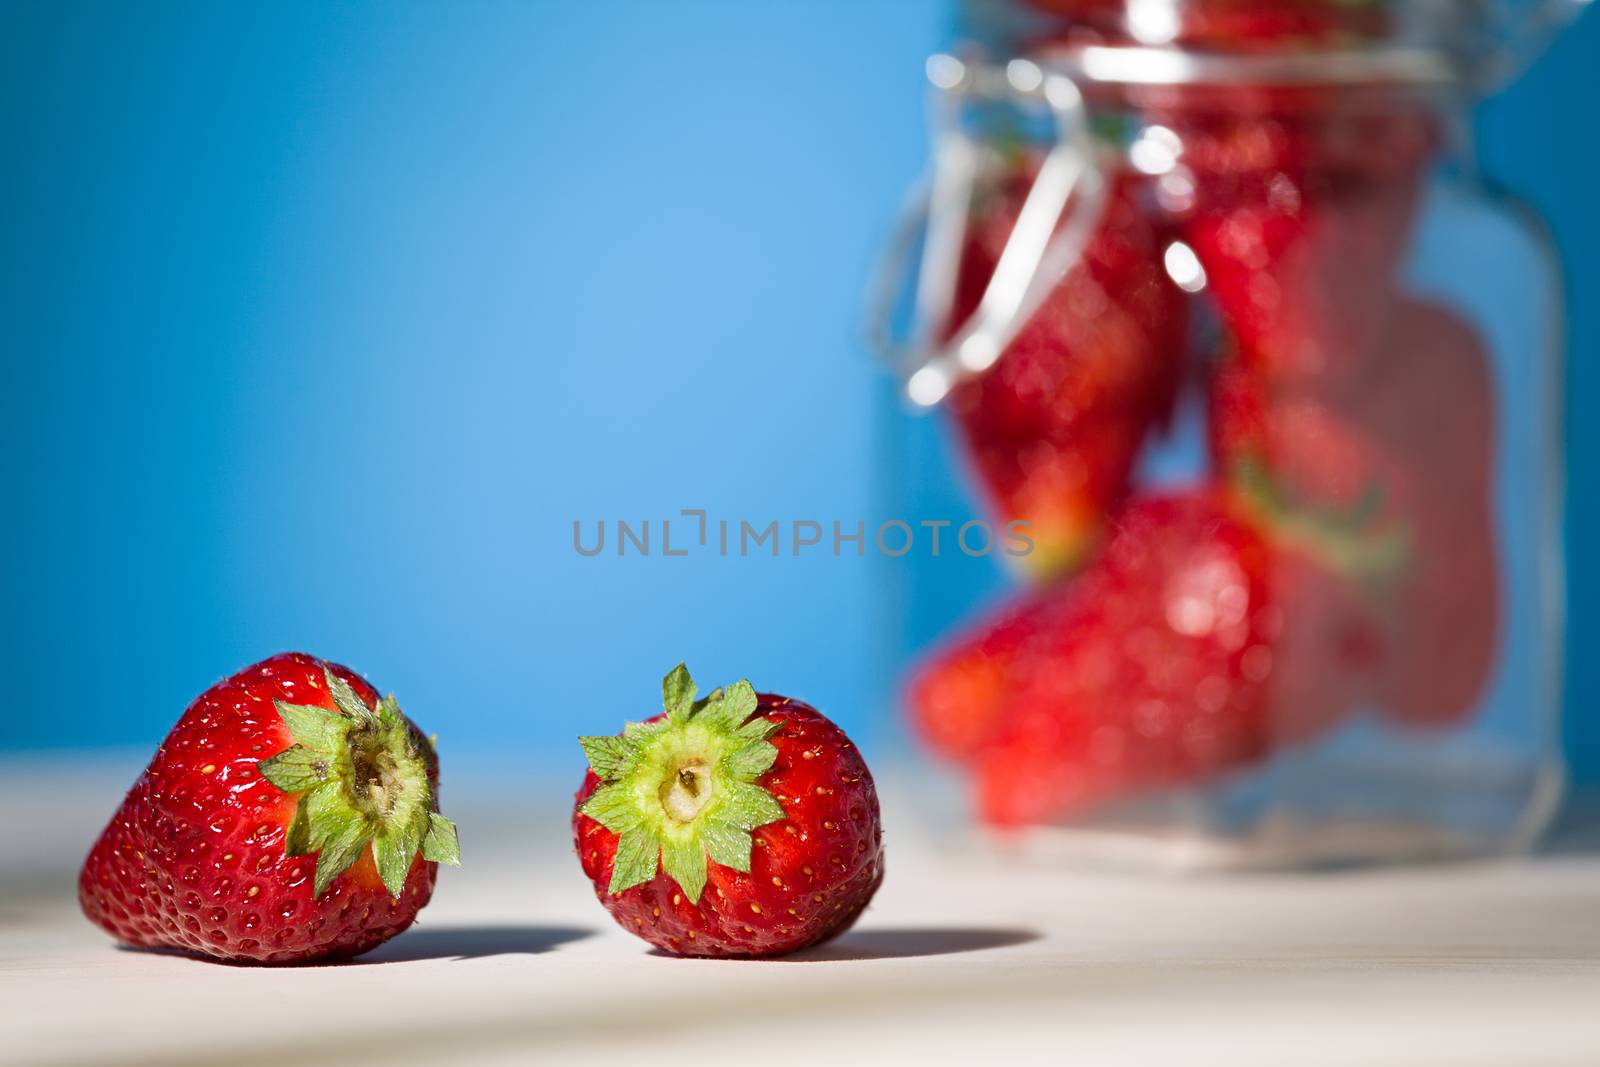 Close up of two strawberries on a table with blue background by LuigiMorbidelli